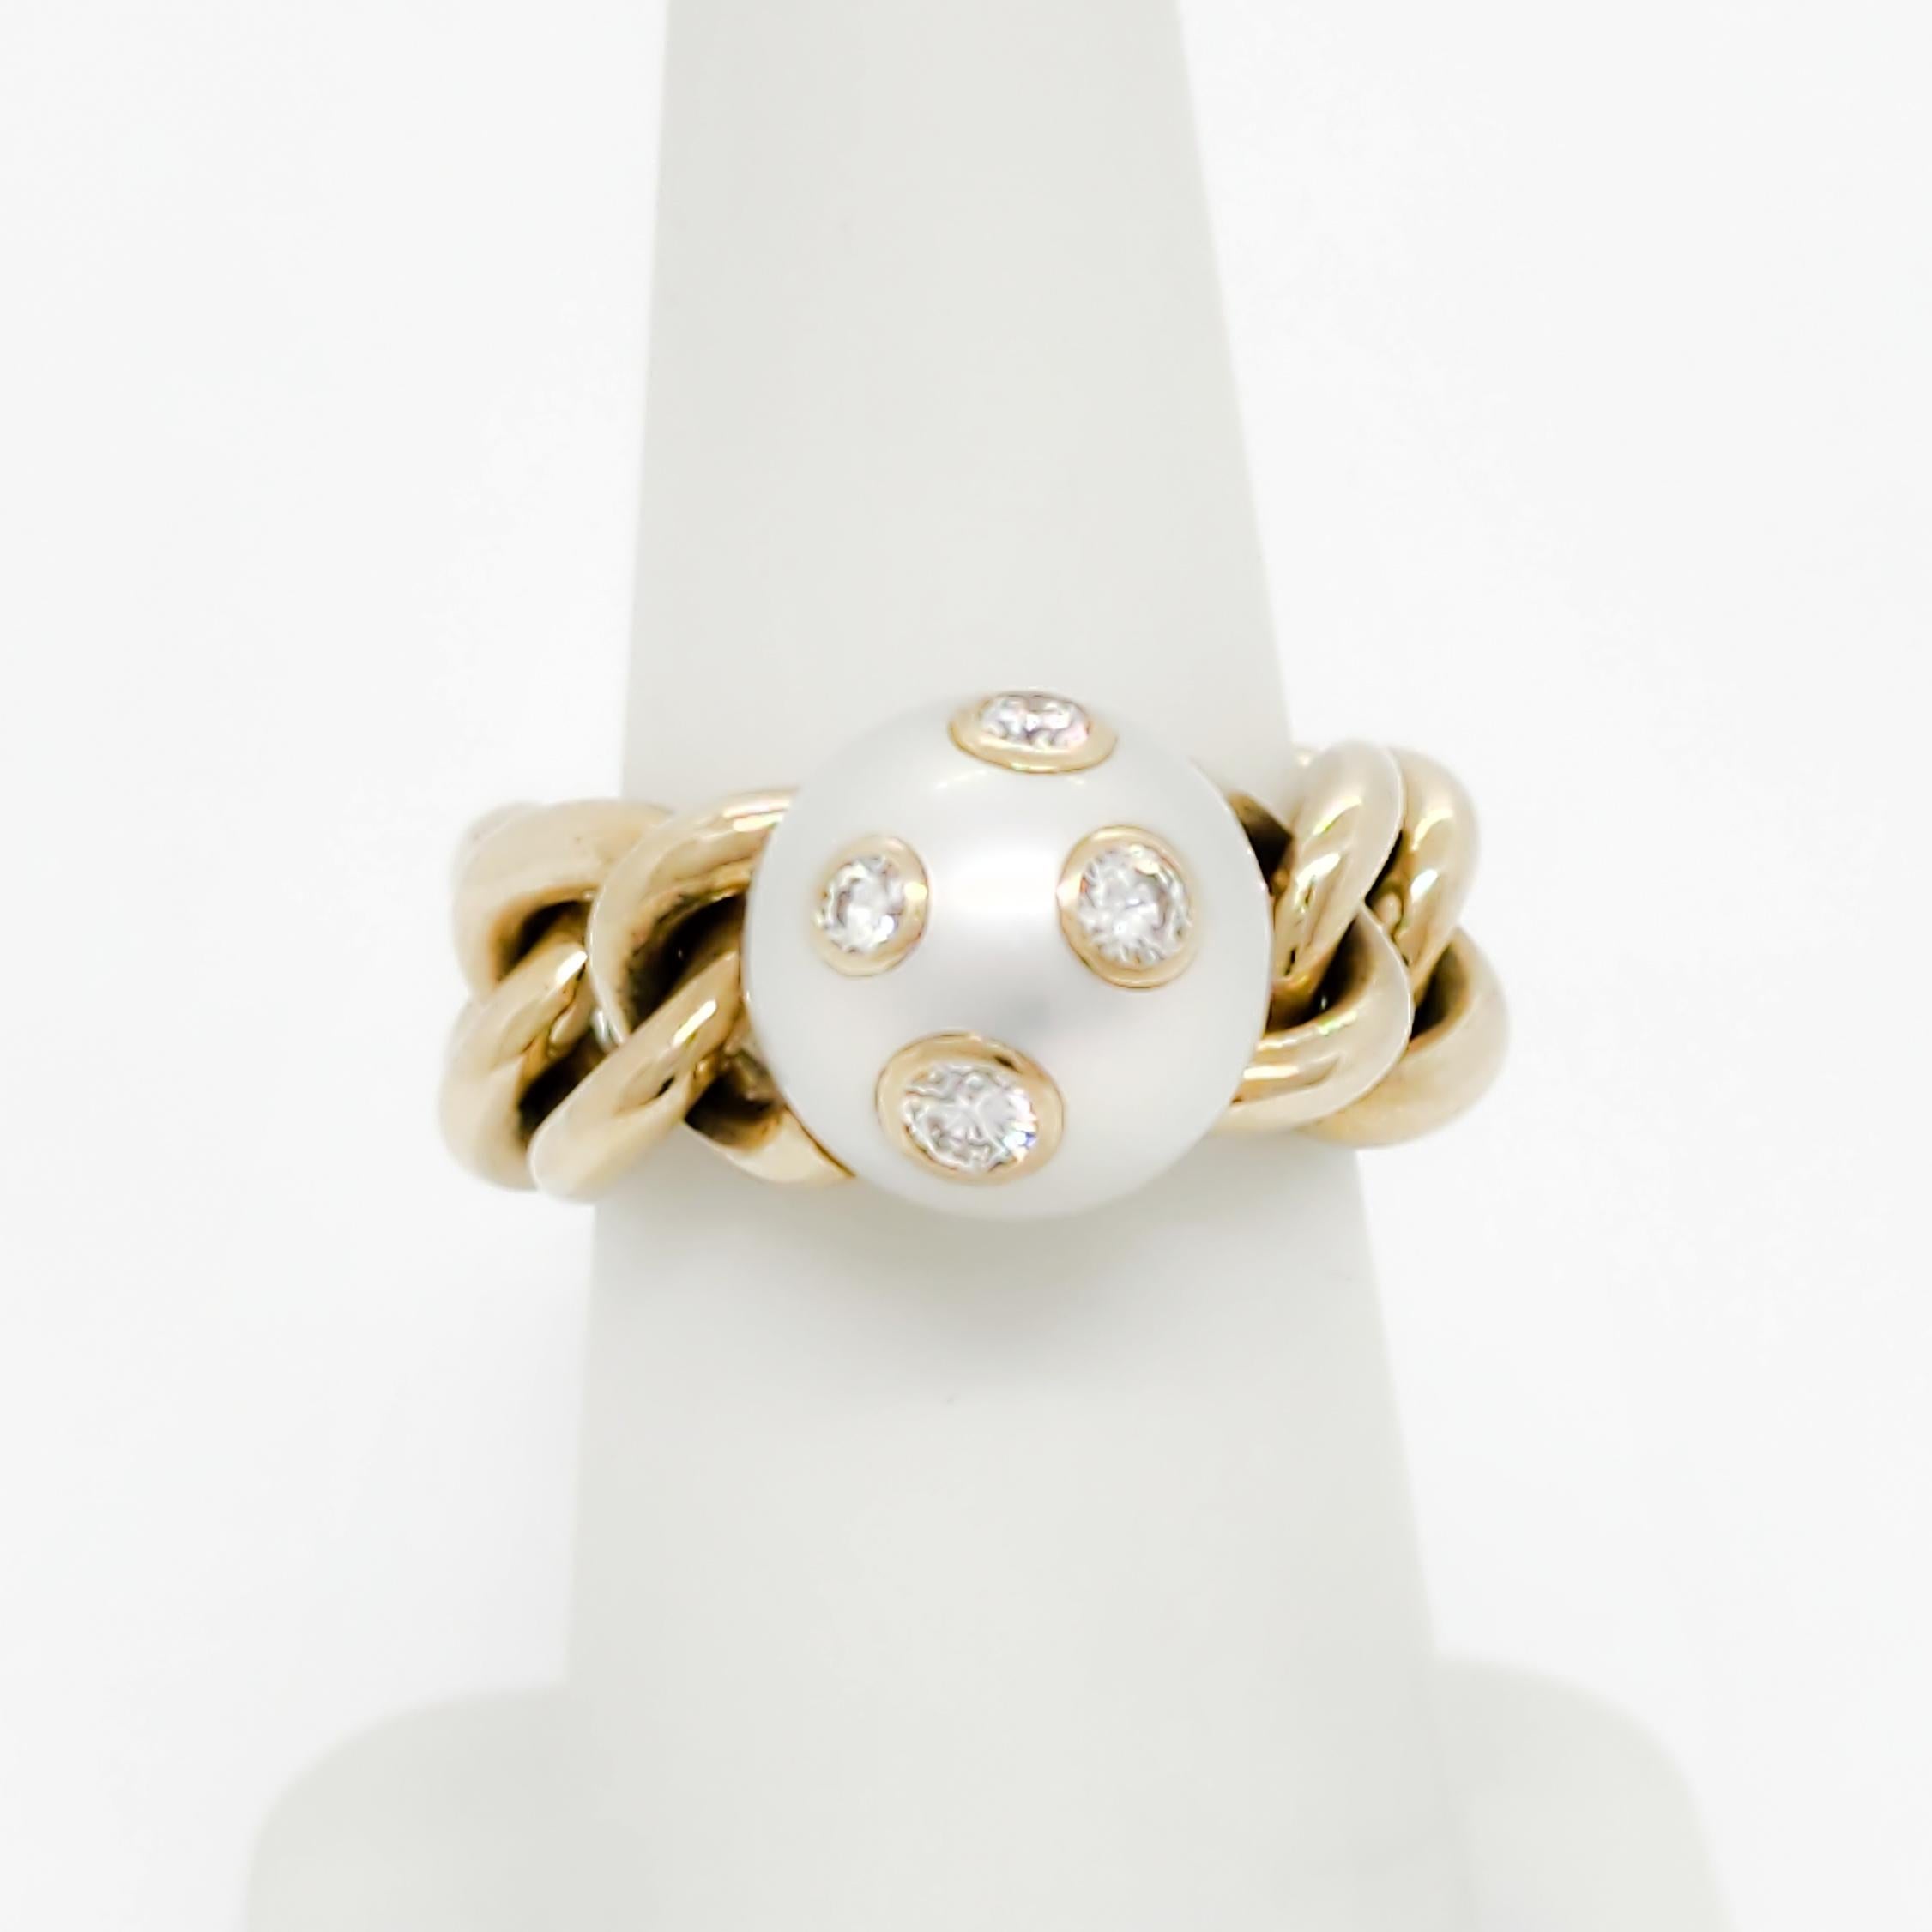 Mikimoto Estate White Pearl and Diamond Chain Link Ring in 18k Yellow Gold 2